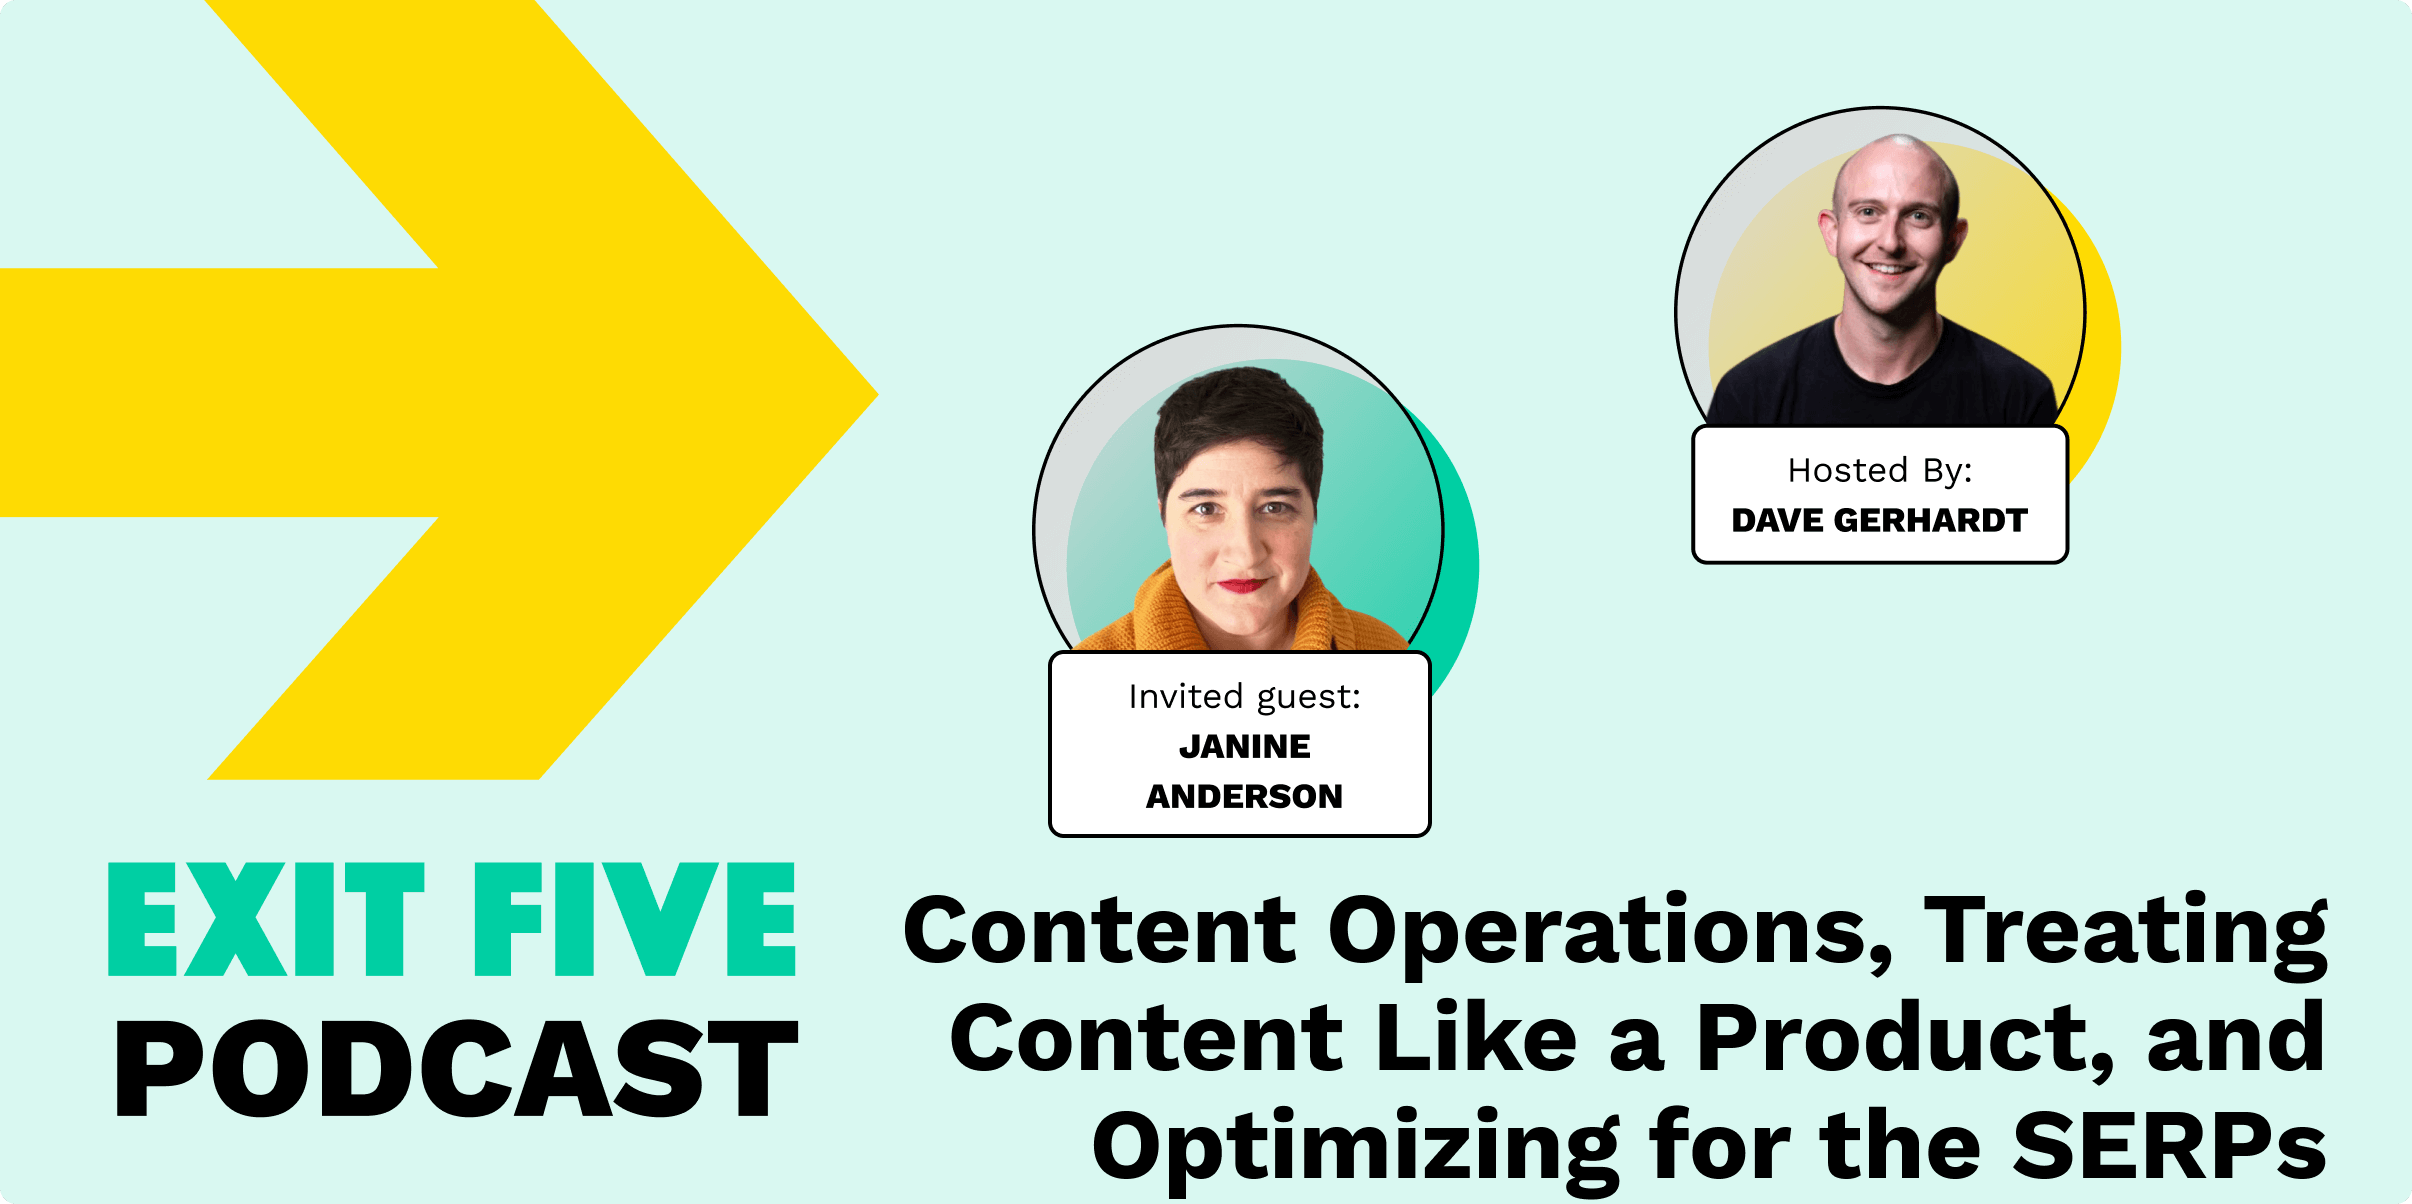 Content Operations, Treating Content Like a Product, and Optimizing for the SERPs